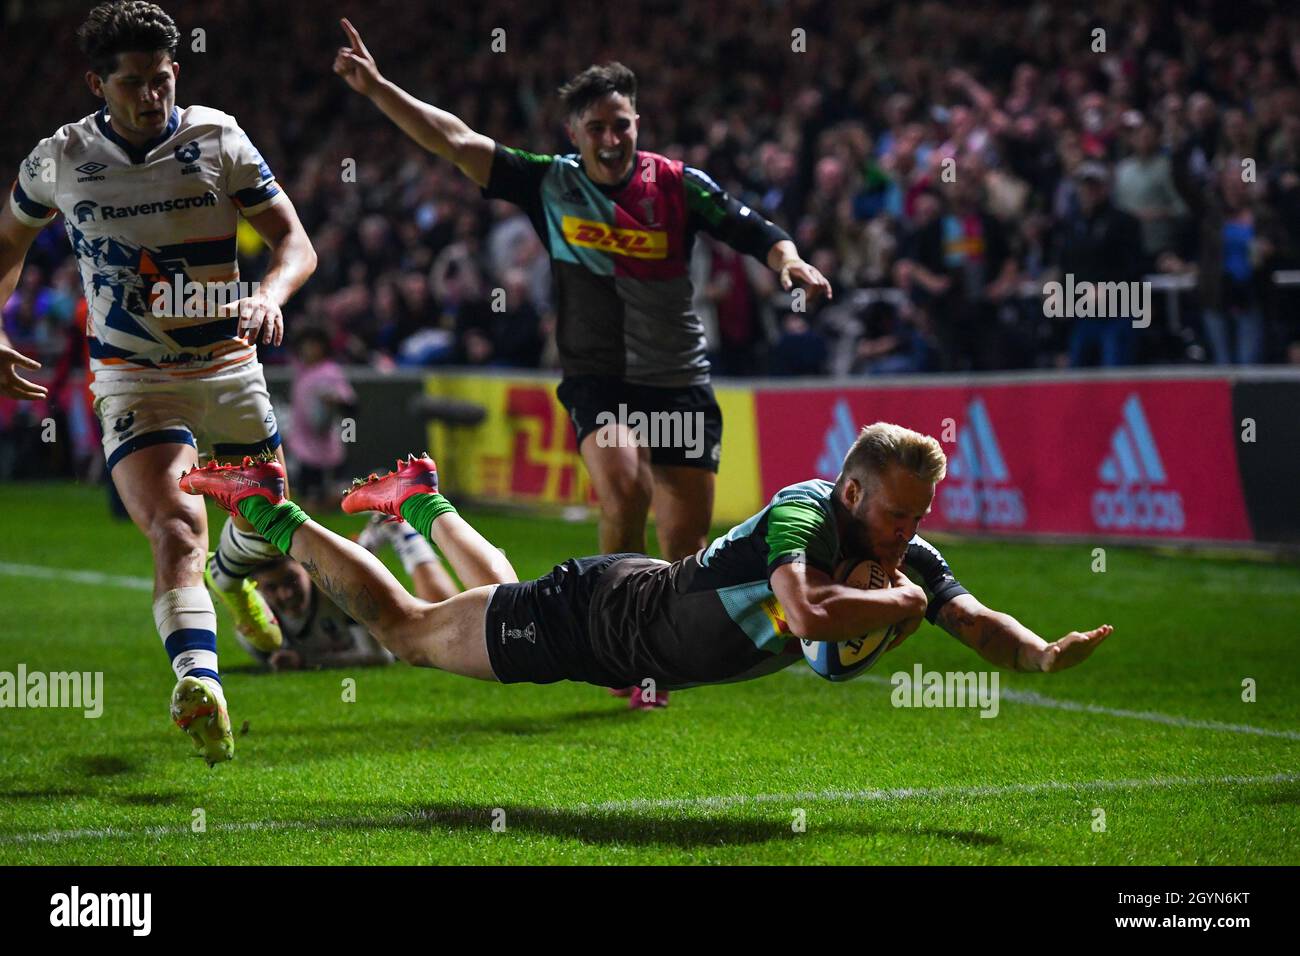 Twickenham Stoop Stadium, UK, UK. 8th October, 2021. Harlequins' Tyrone Green scores his sides sixth try during the Gallagher English Premiership game between Harlequins and Bristol Bears: Credit: Ashley Western/Alamy Live News Stock Photo